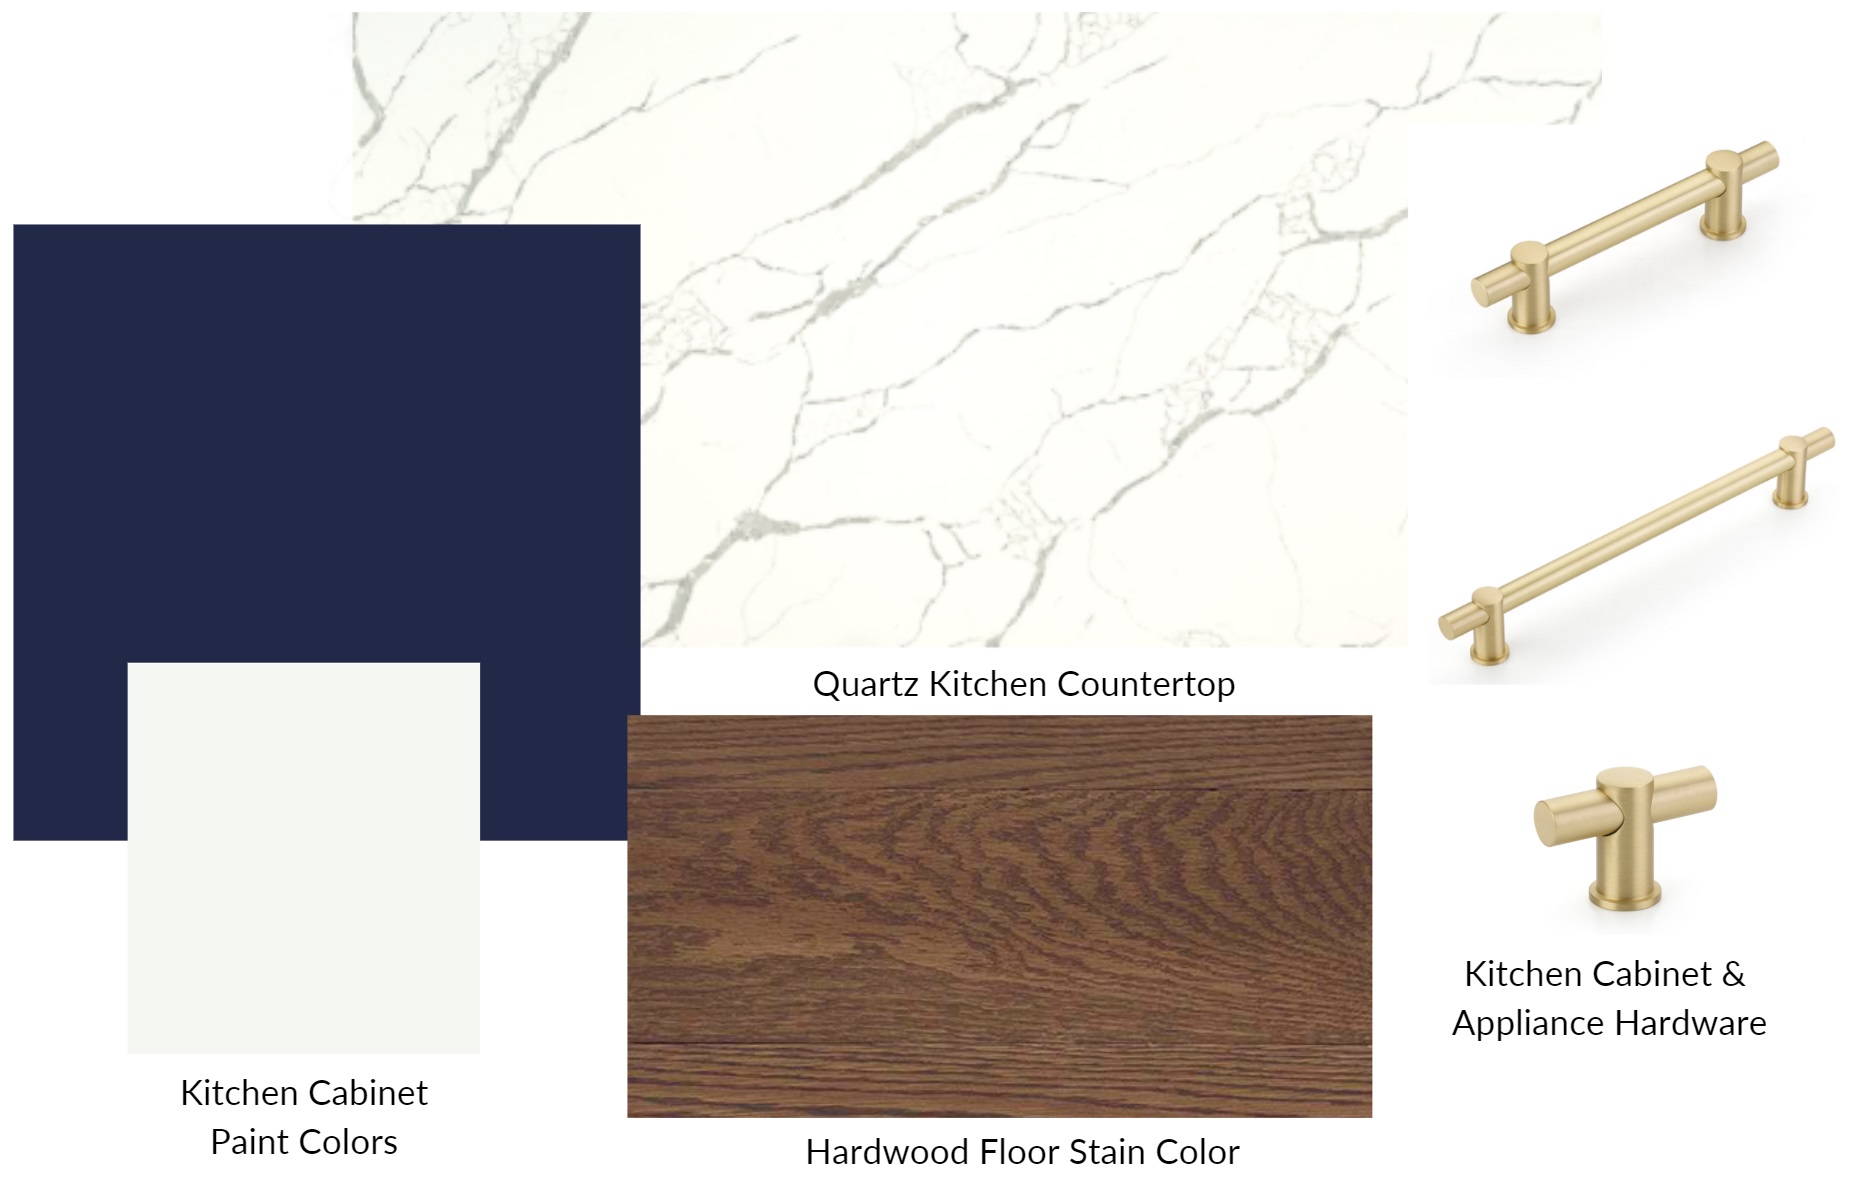 Mood Board Elements for New Kitchen Style Designed by Kashian Bros